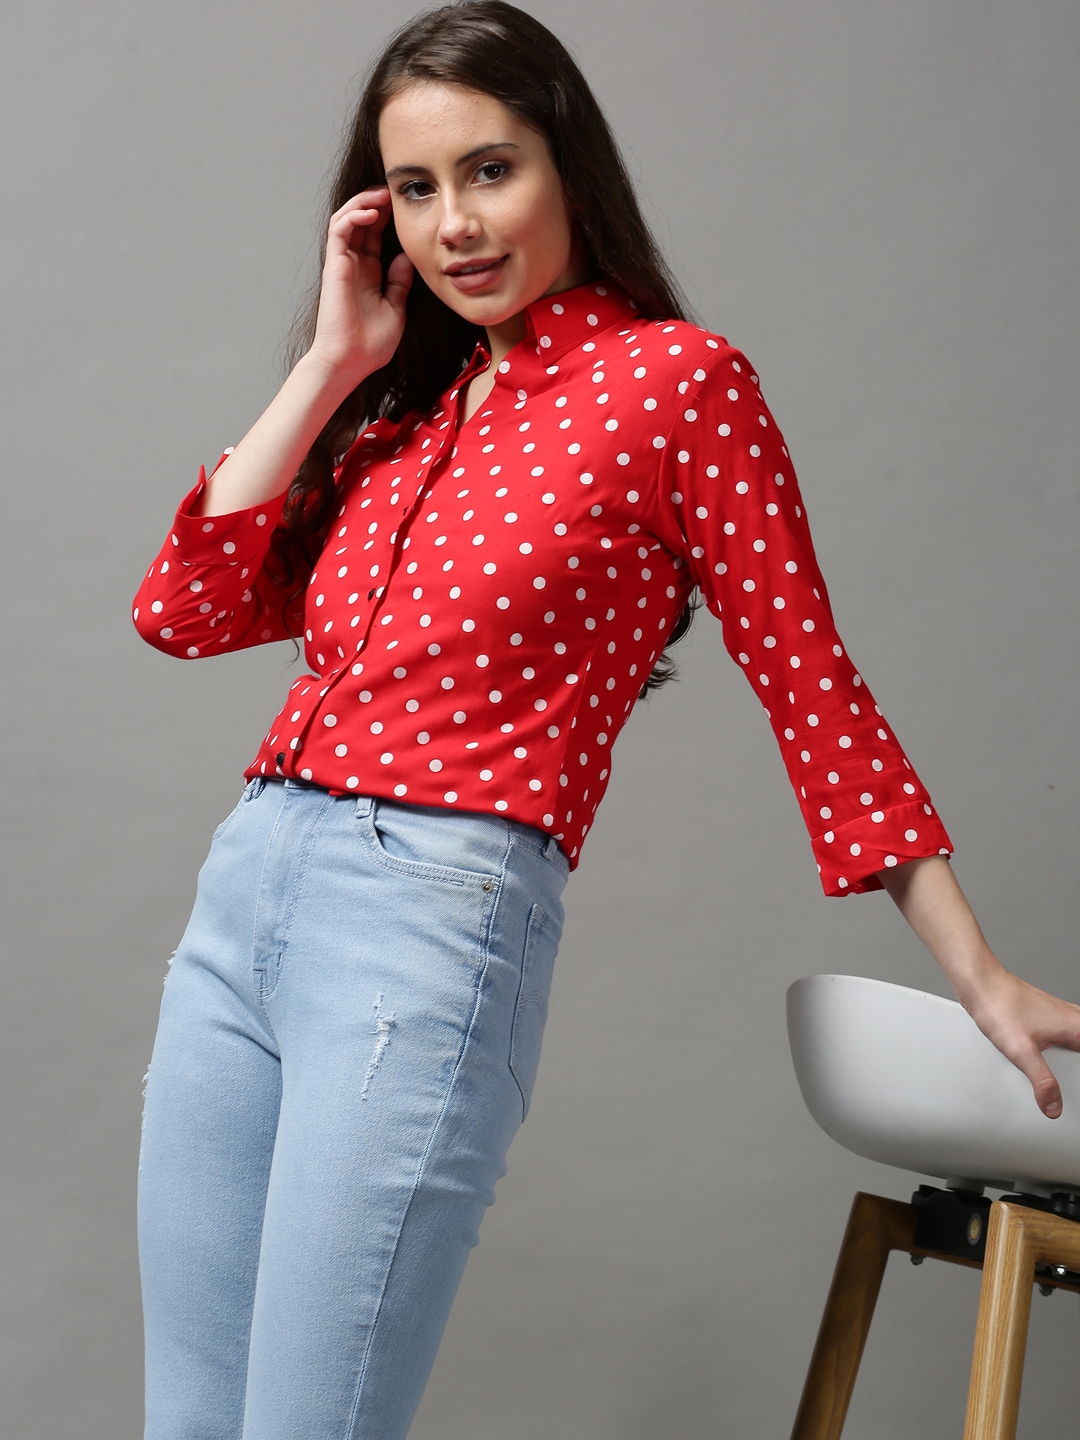 SHOWOFF Women's Spread Collar Printed Red Cotton Shirt